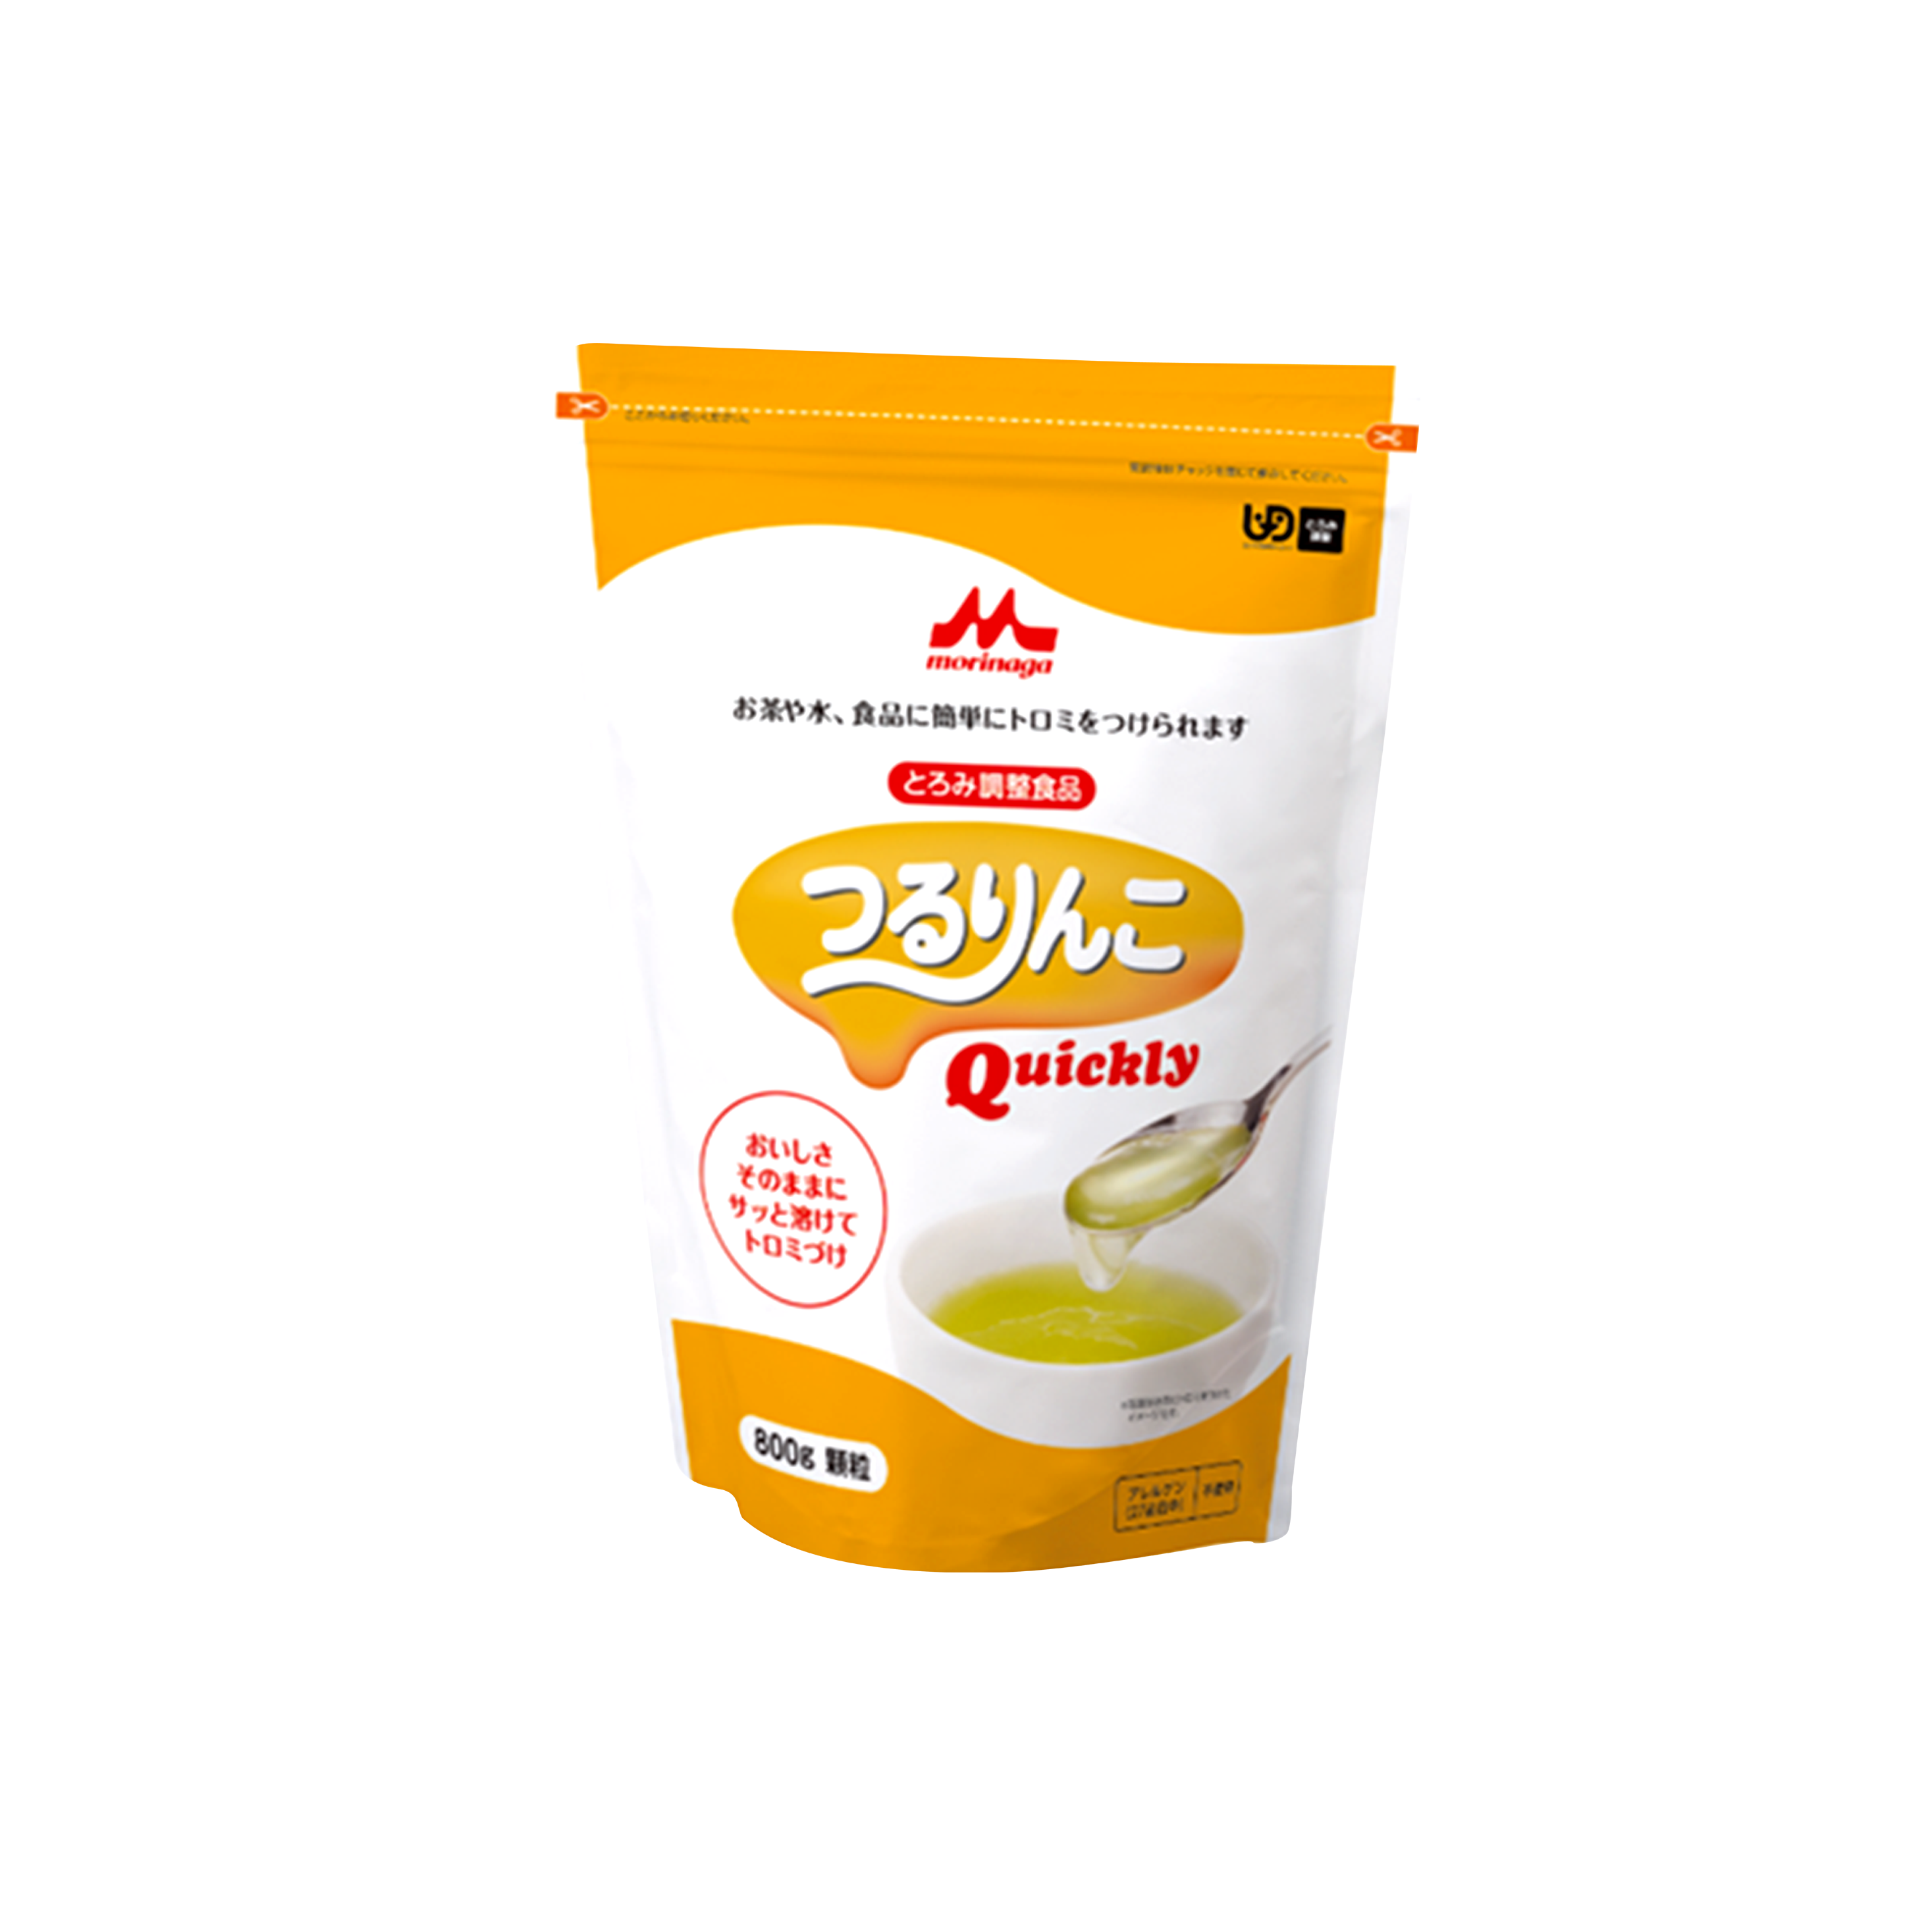 Tsururinko Quickly – A Food Thickener For Dysphagia